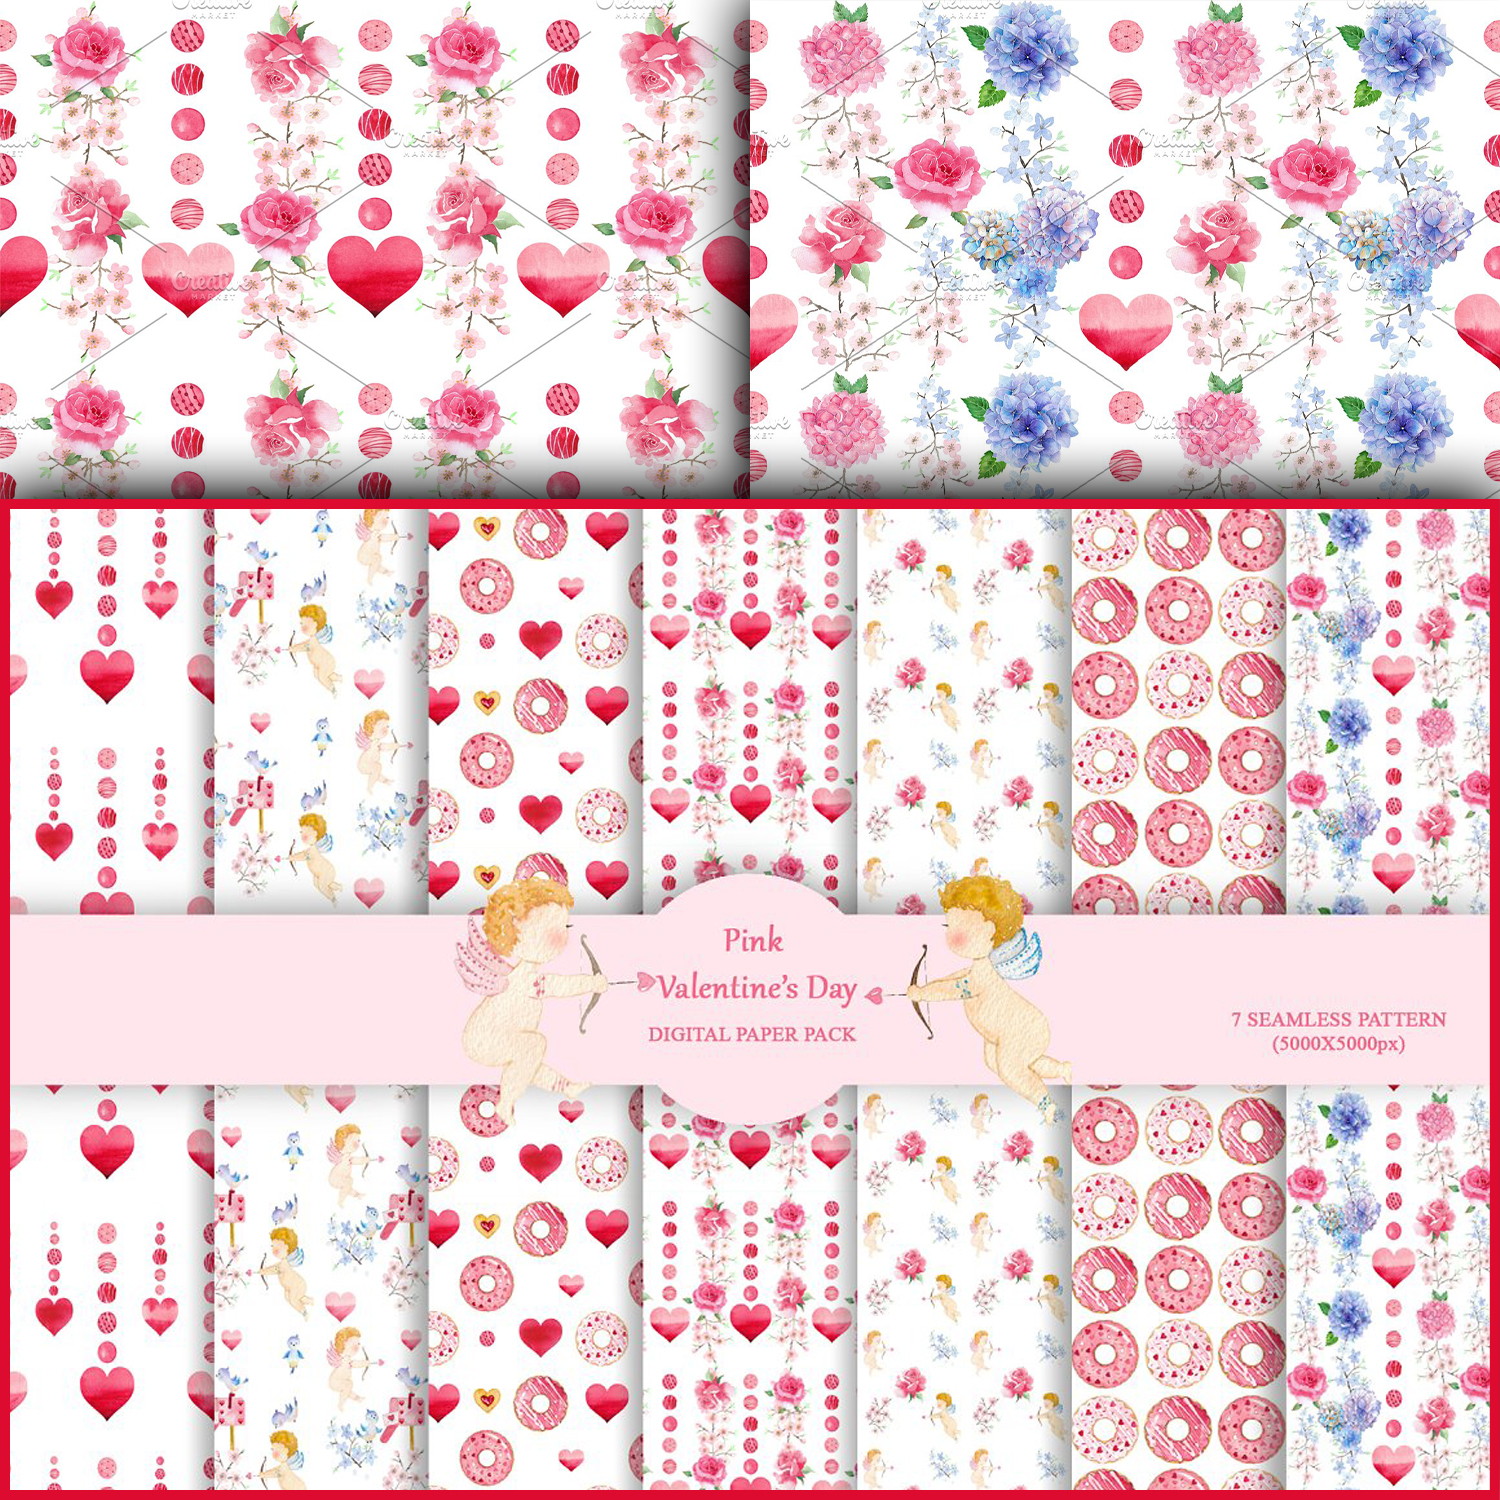 Illustrations of textures valentines day digital paper pack.